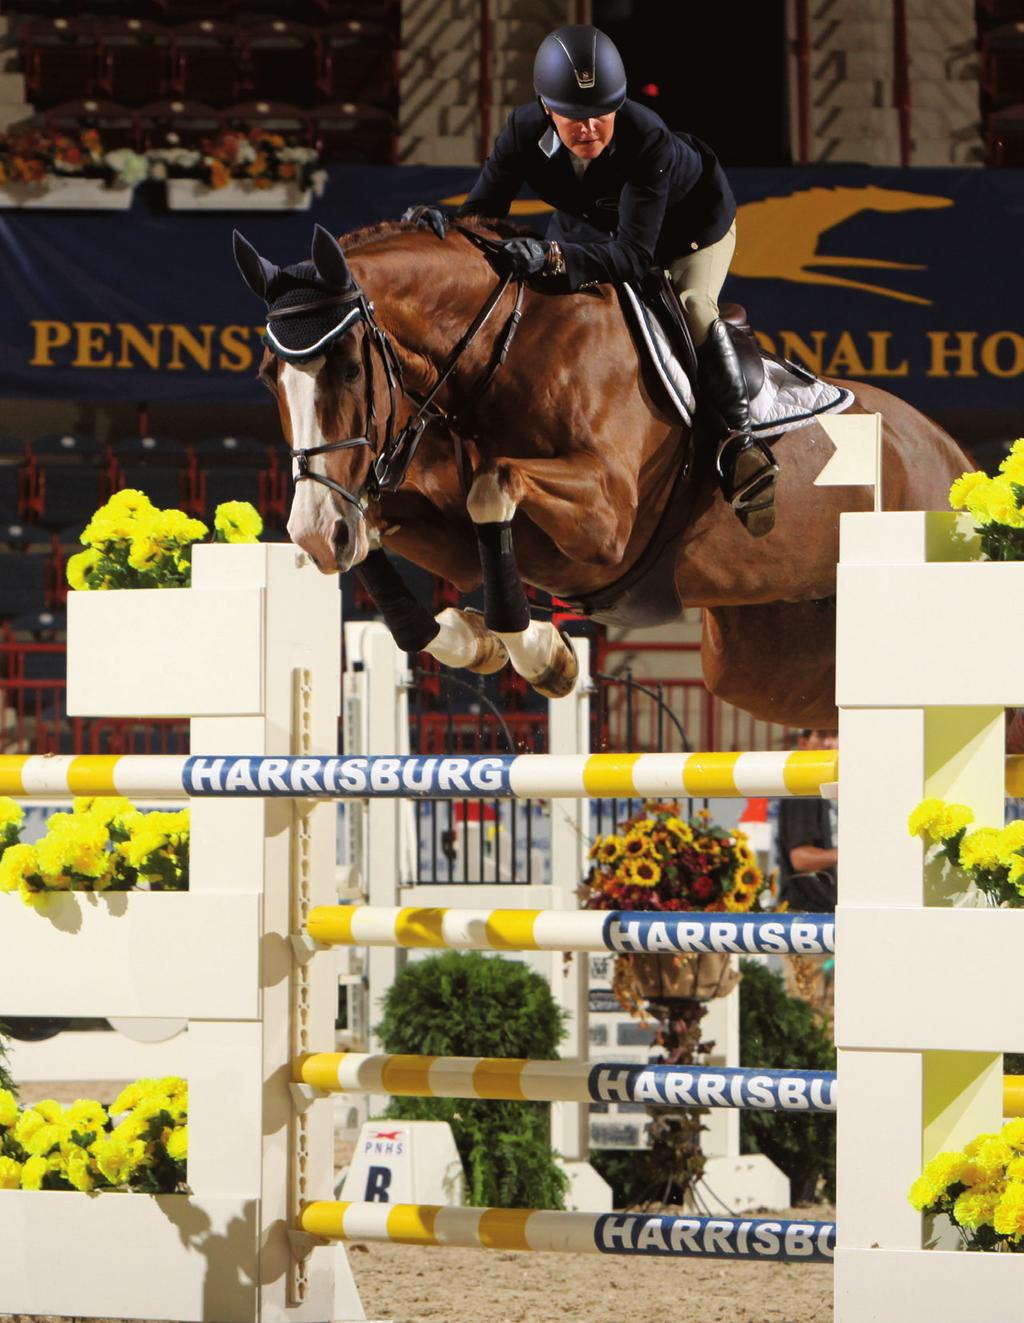 Destination Harrisburg As one of the nation s oldest and most revered horse shows, the 71